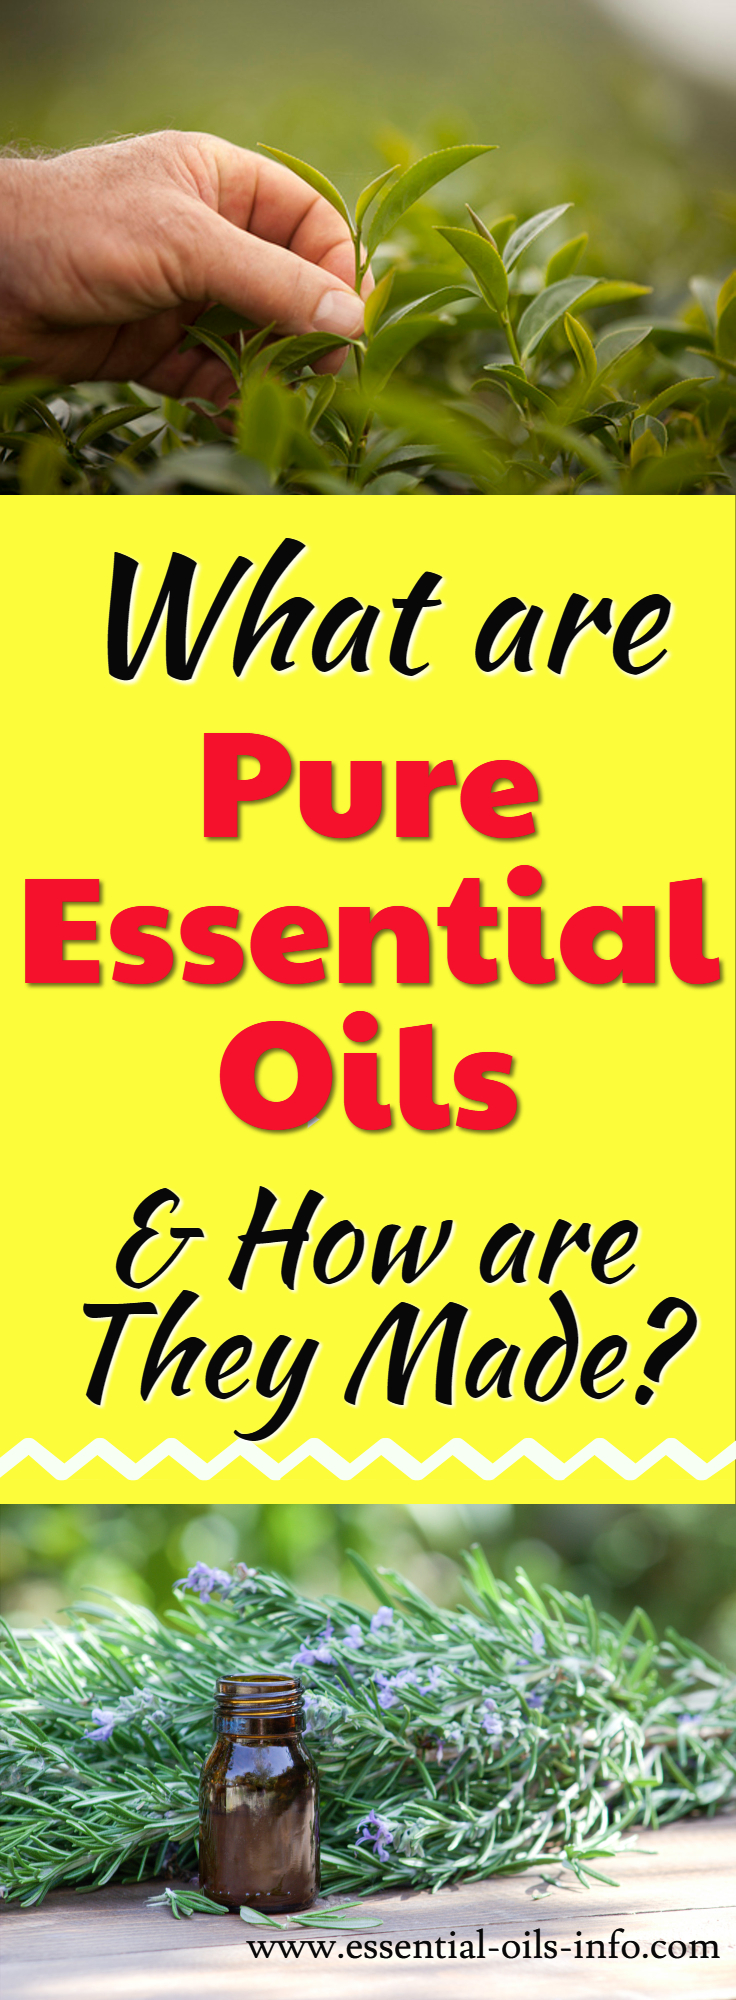 Find out what pure essential oils are and how they are made. Learn why it's important to get pure oils and how to avoid essential oils with chemical additives. Make sure you only use pure oils on your family members and pets! 